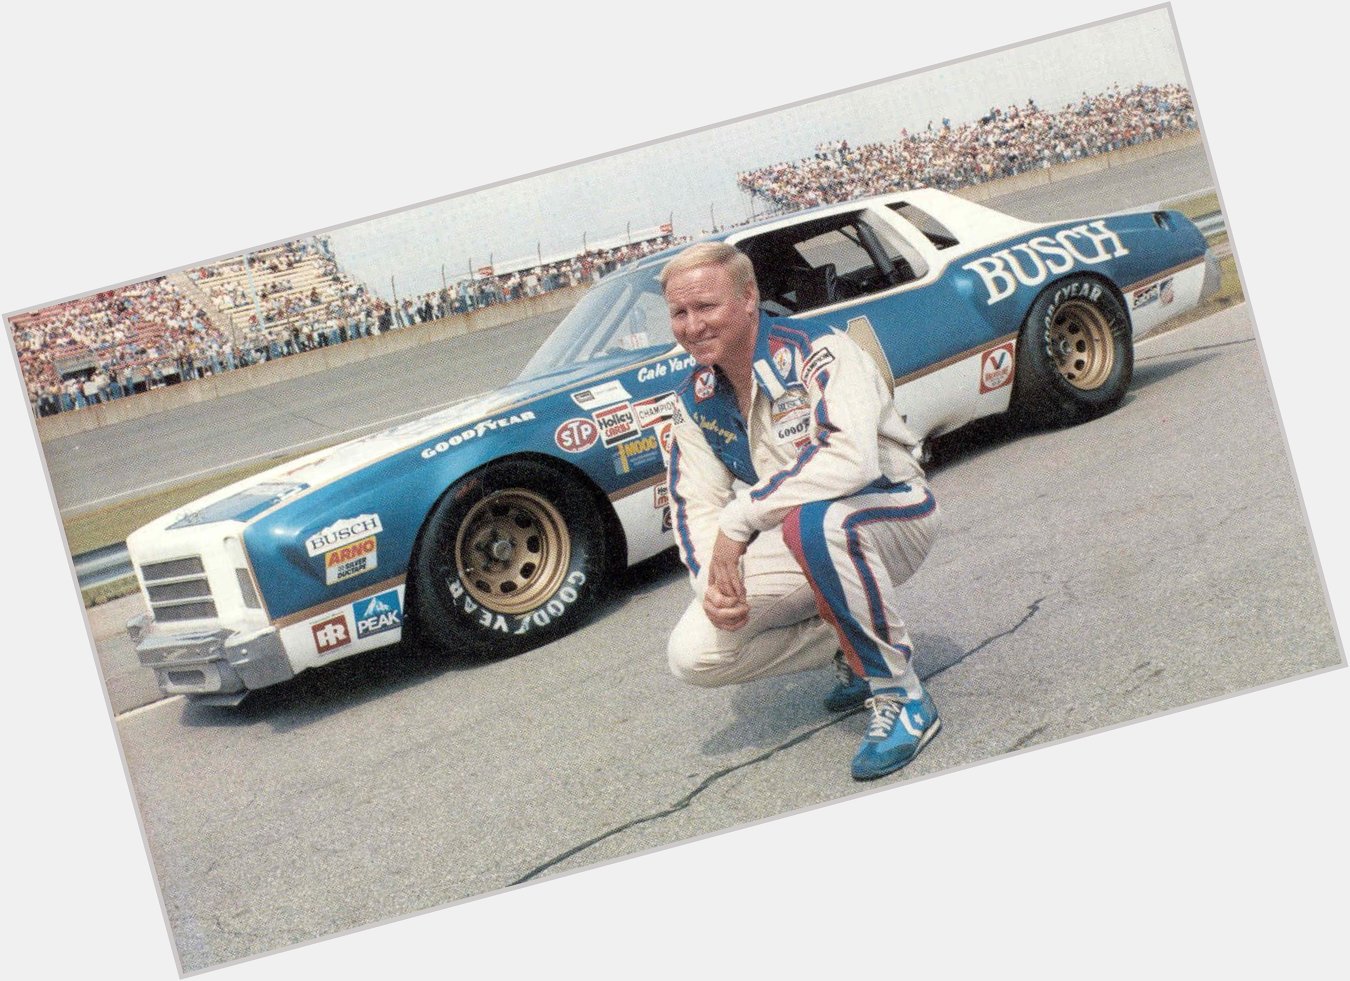 Happy Birthday to Cale Yarborough, who turns 76 today! 